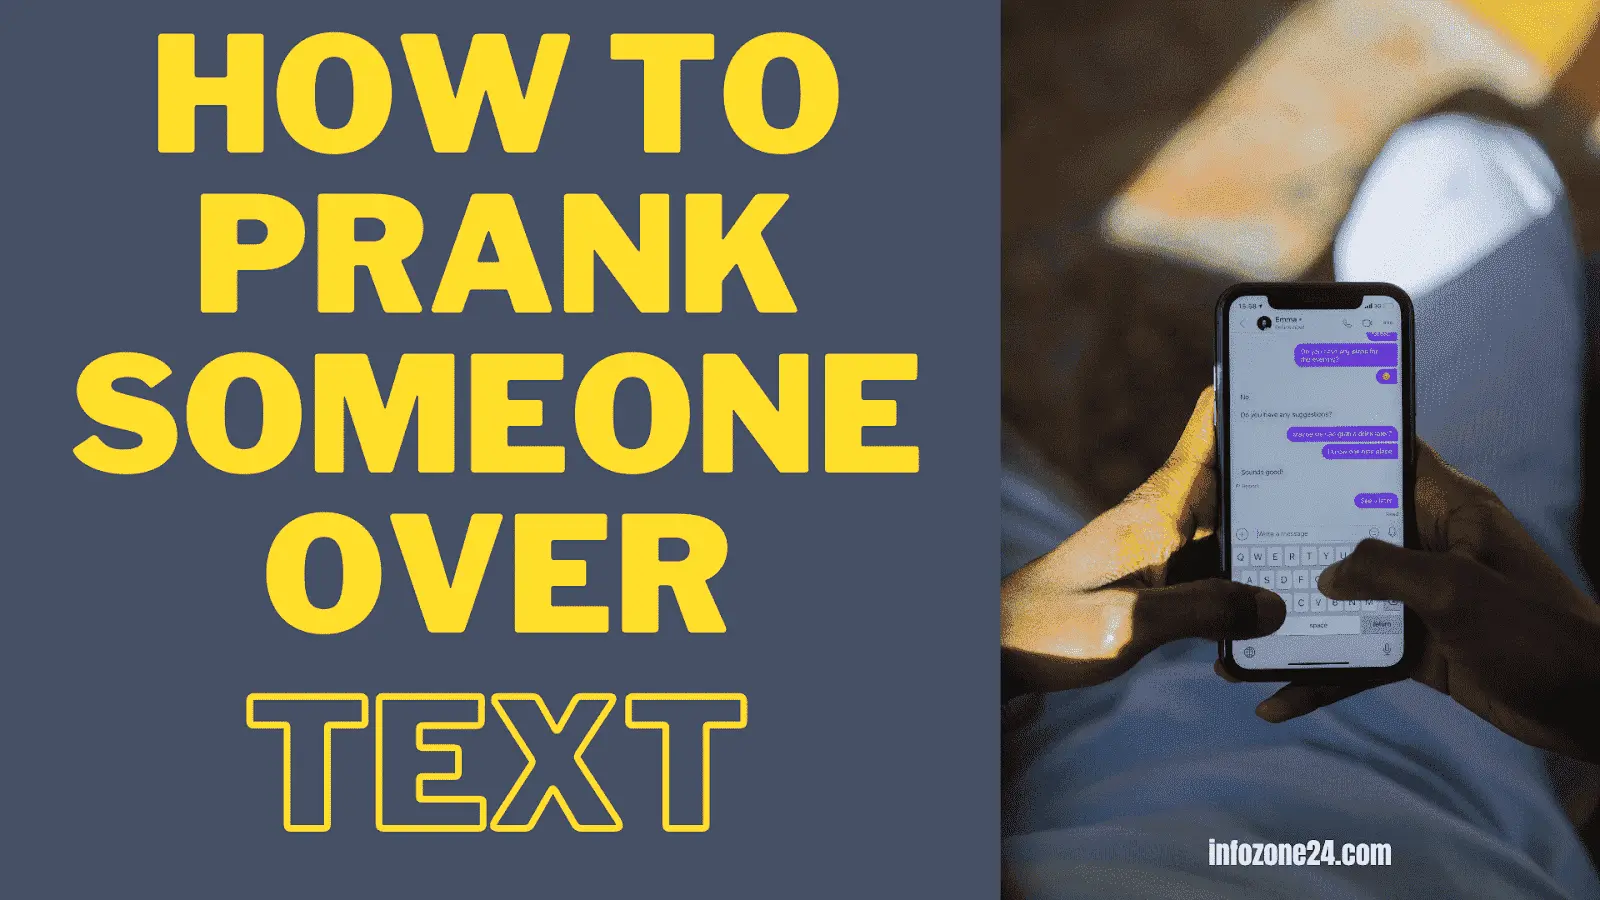 How To Prank Someone Over Text